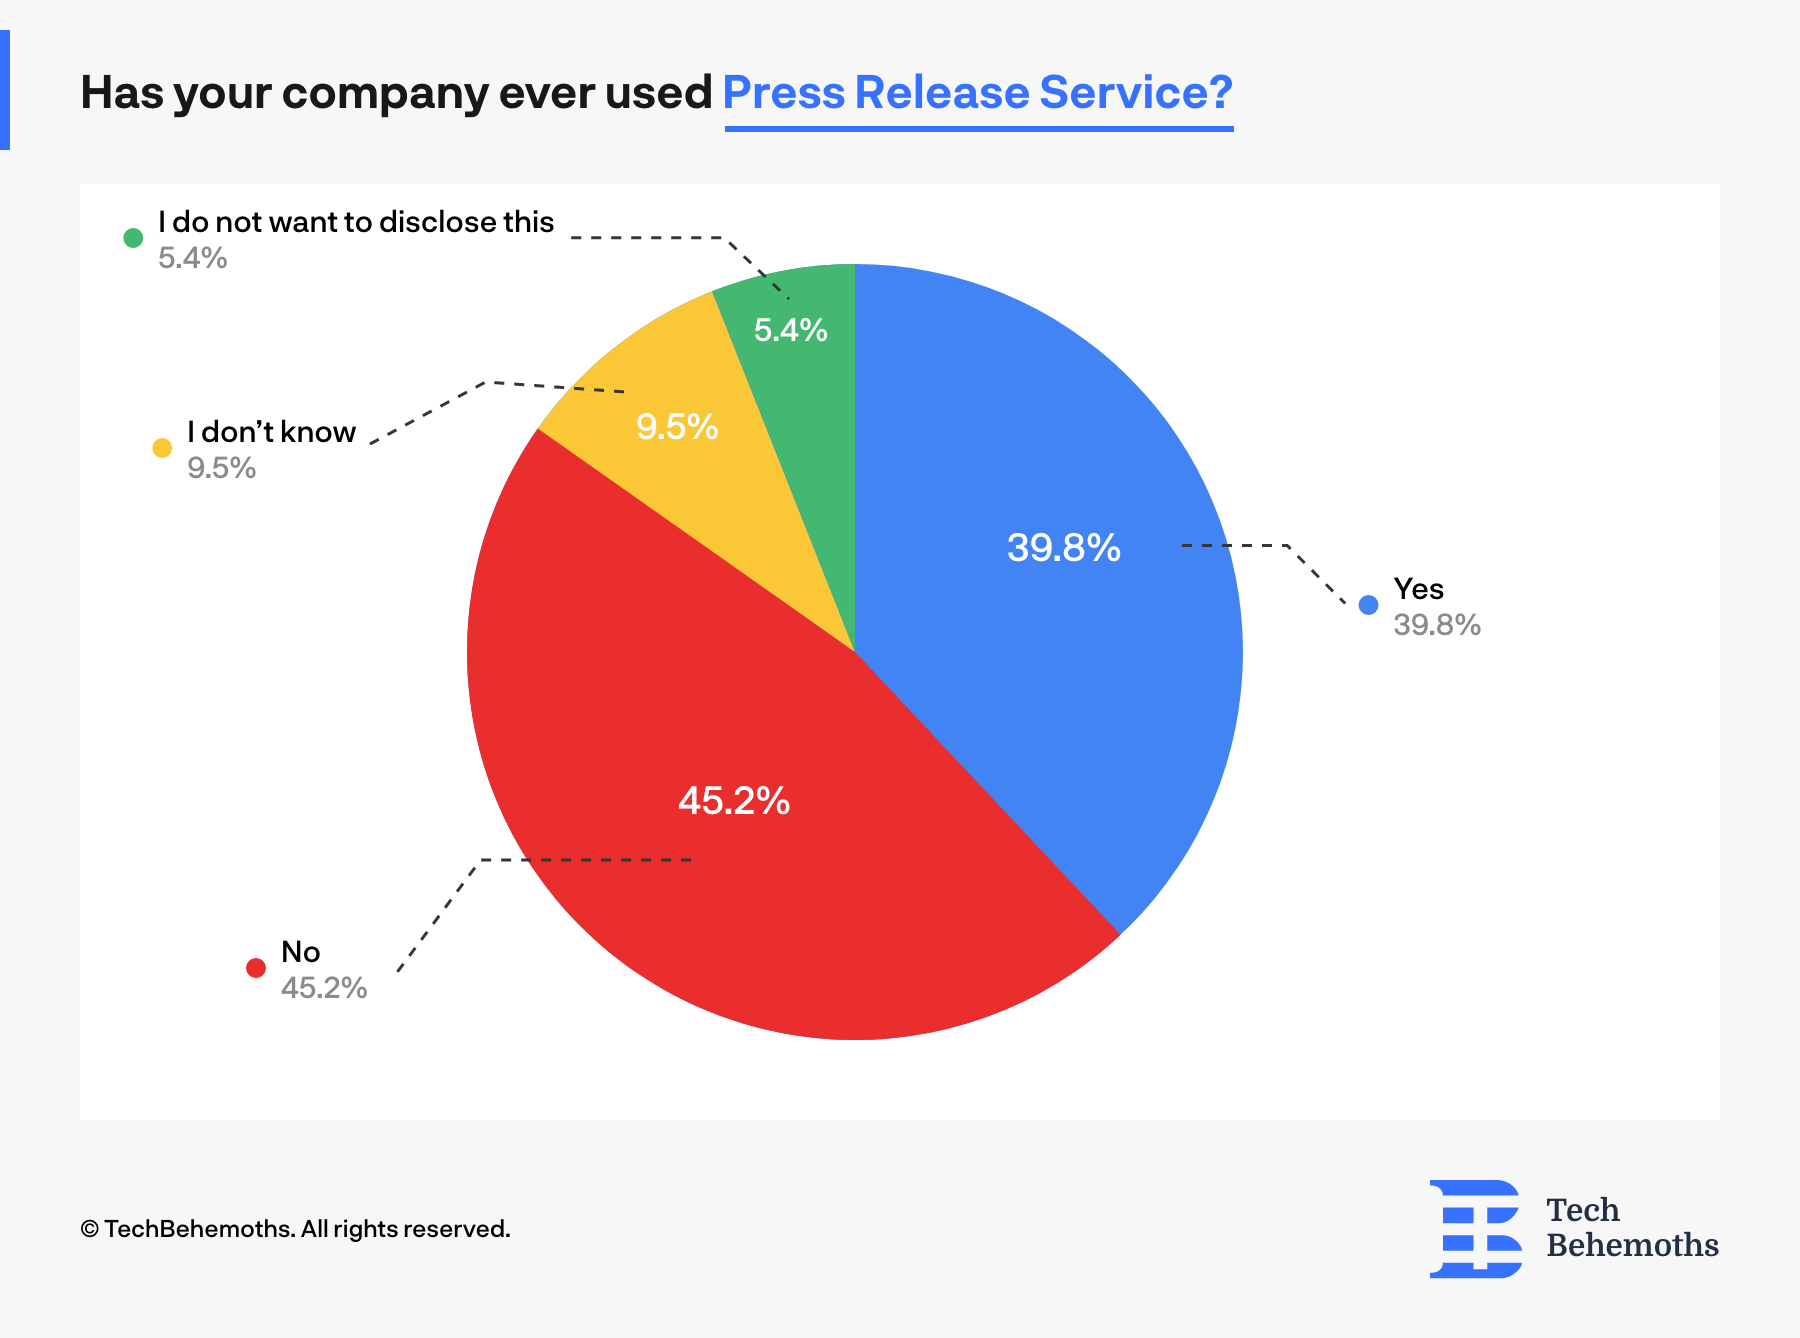 45.2% of IT companies and digital agencies declared that they never used press release services - survey results show